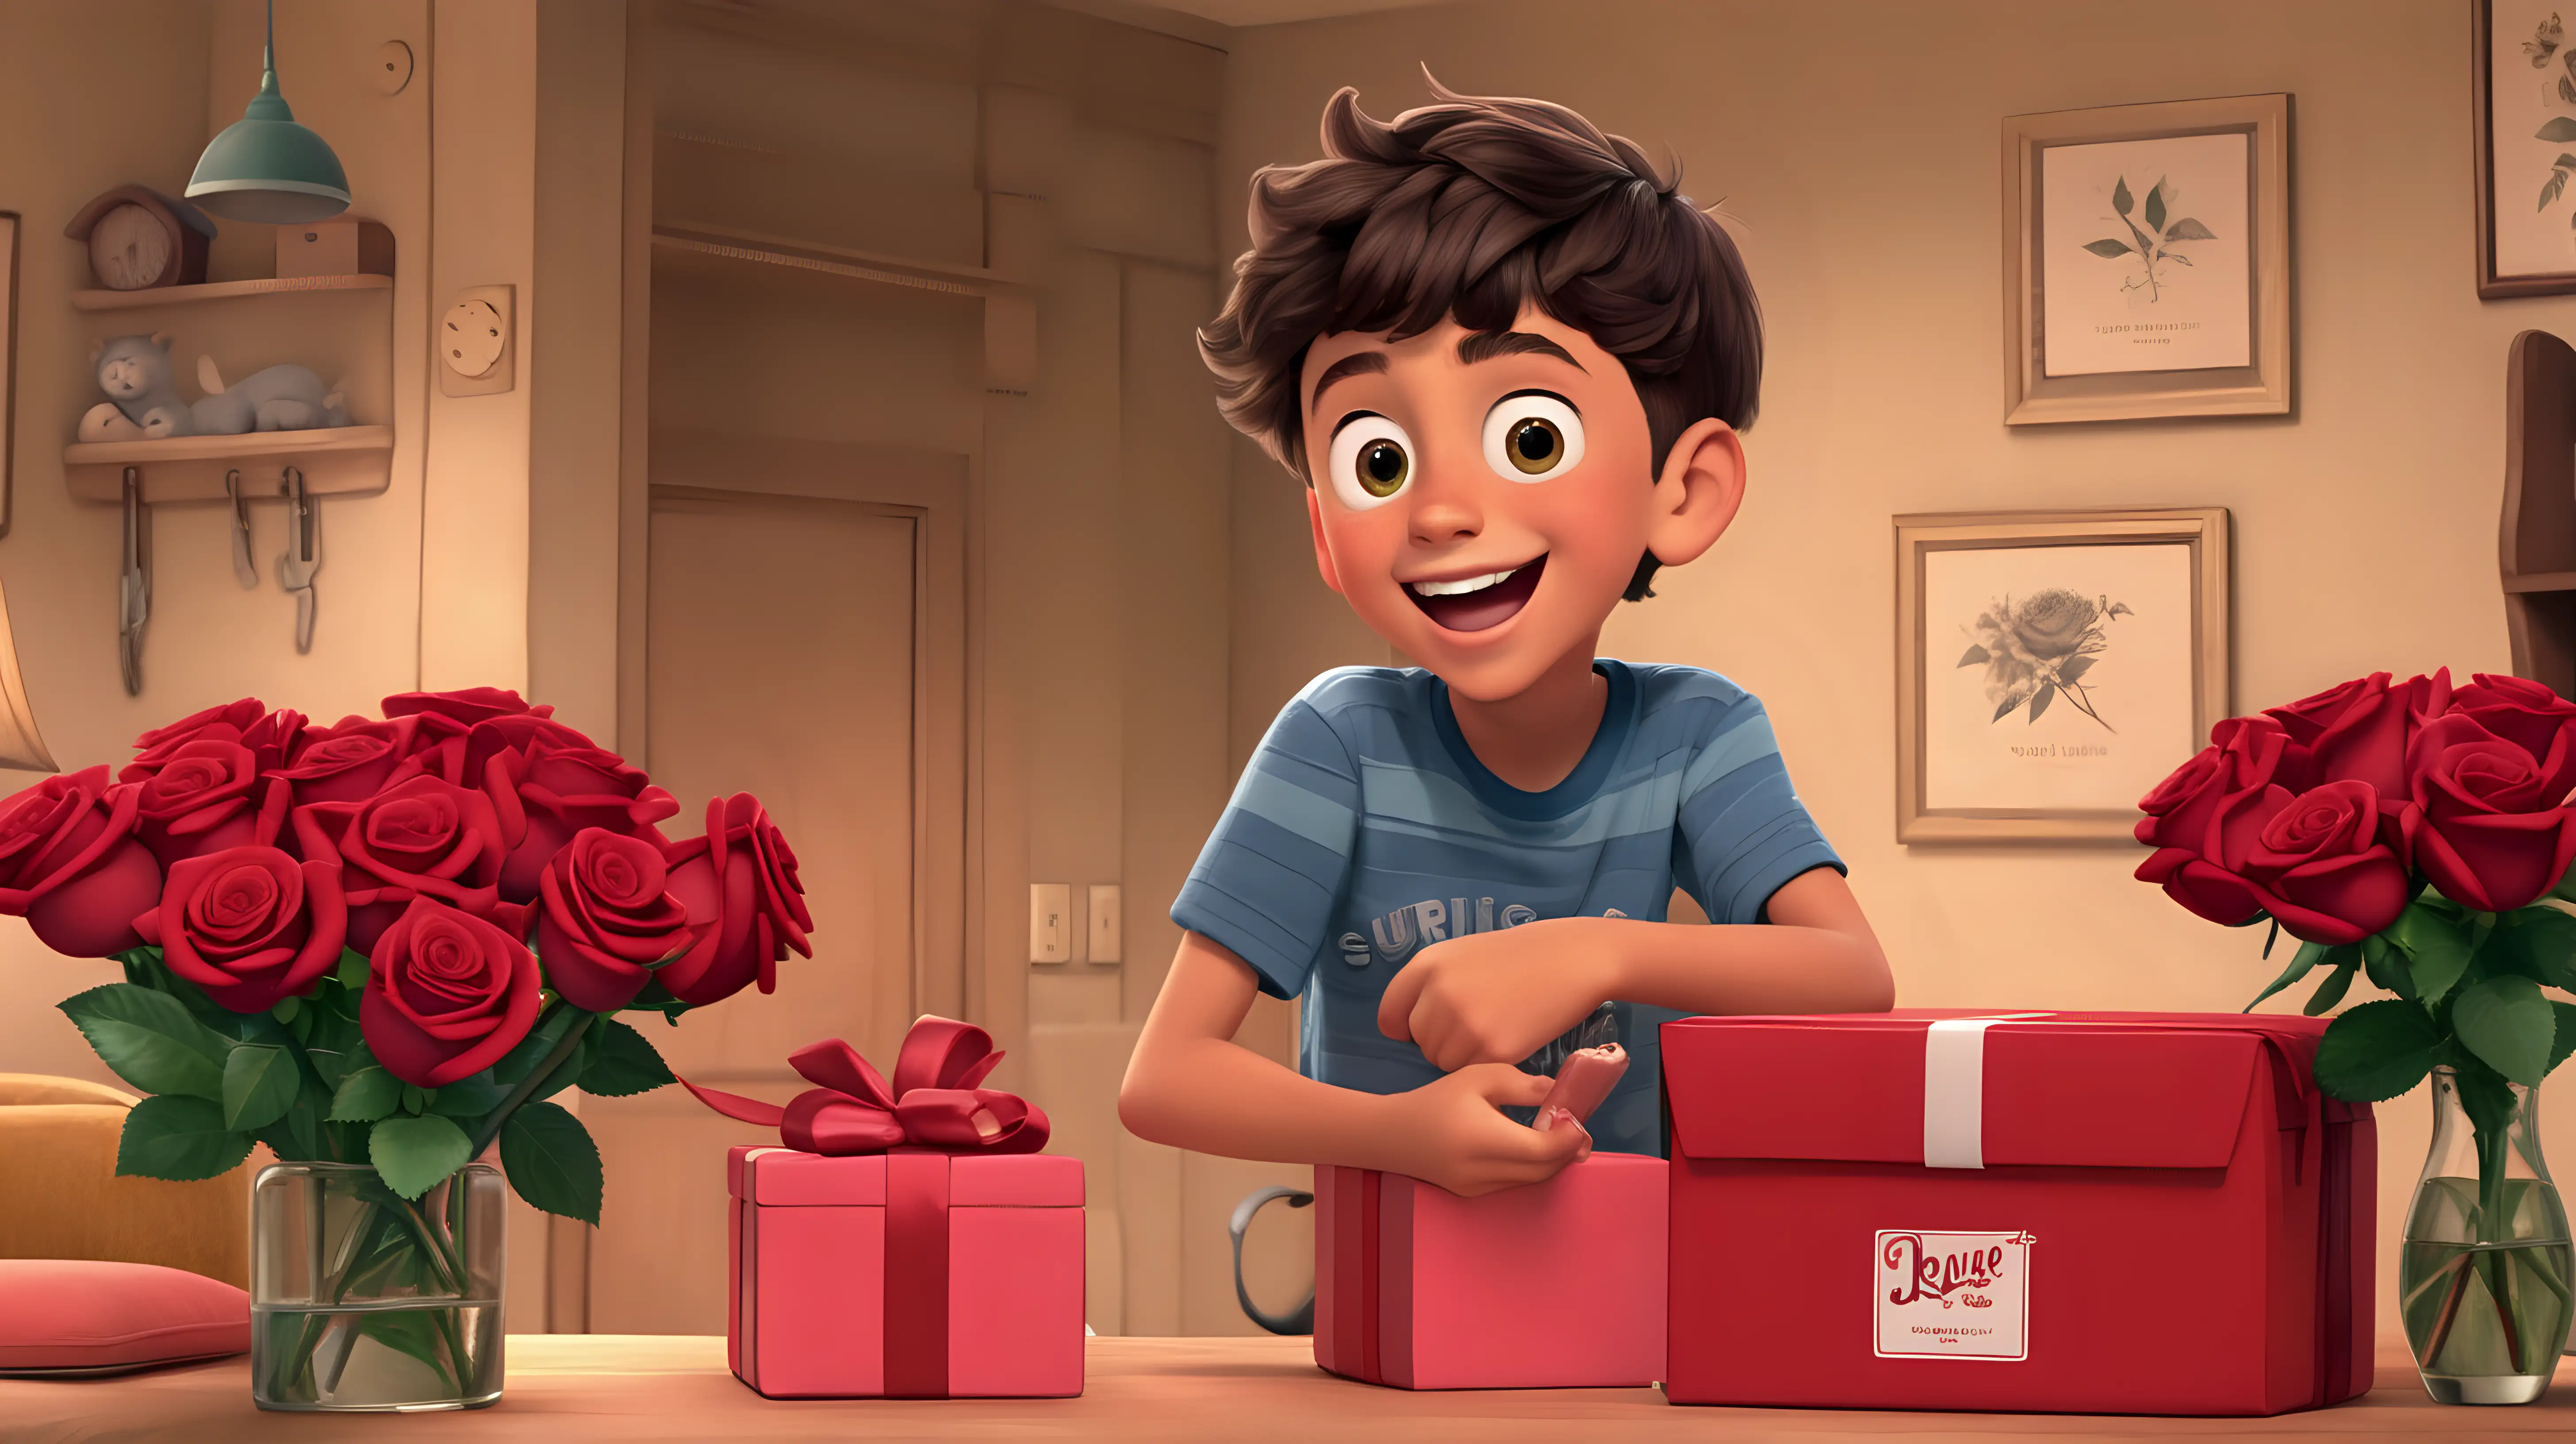 Boy Planning Surprise Rose Delivery Anticipation and Excitement Animated Scene